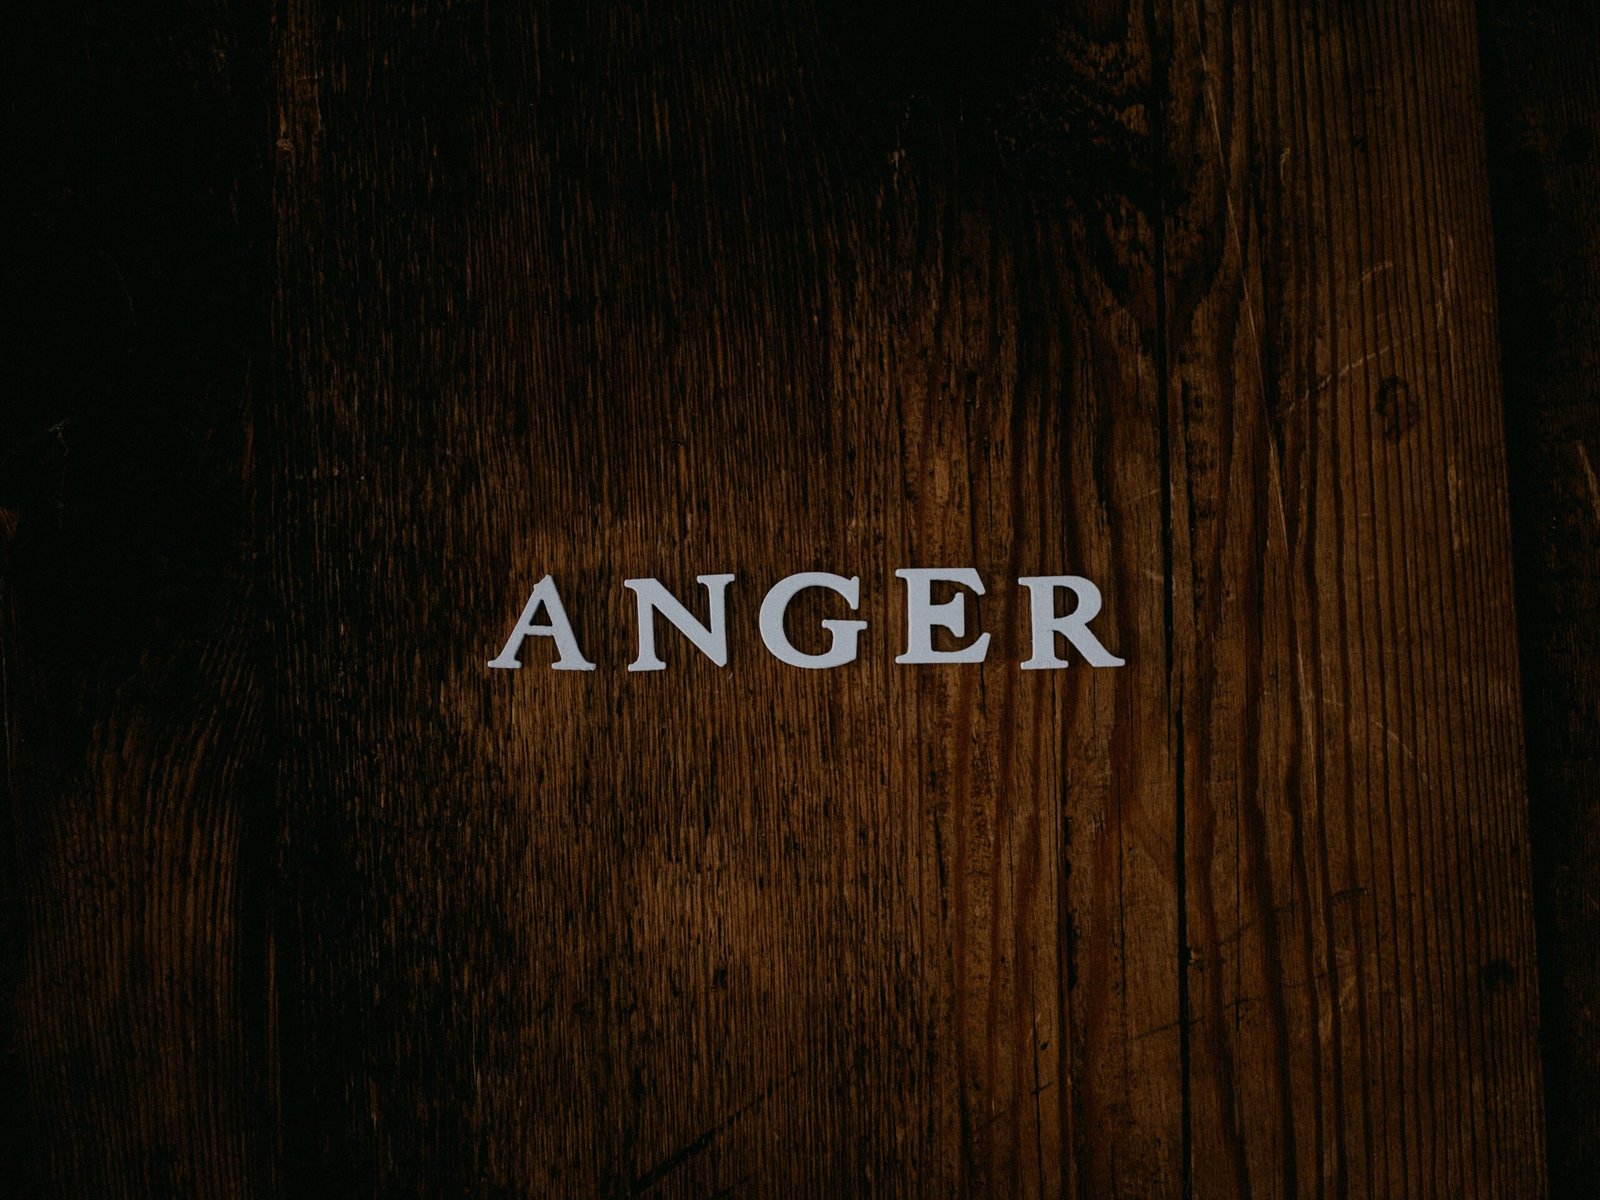 Anger -the second stage of grief